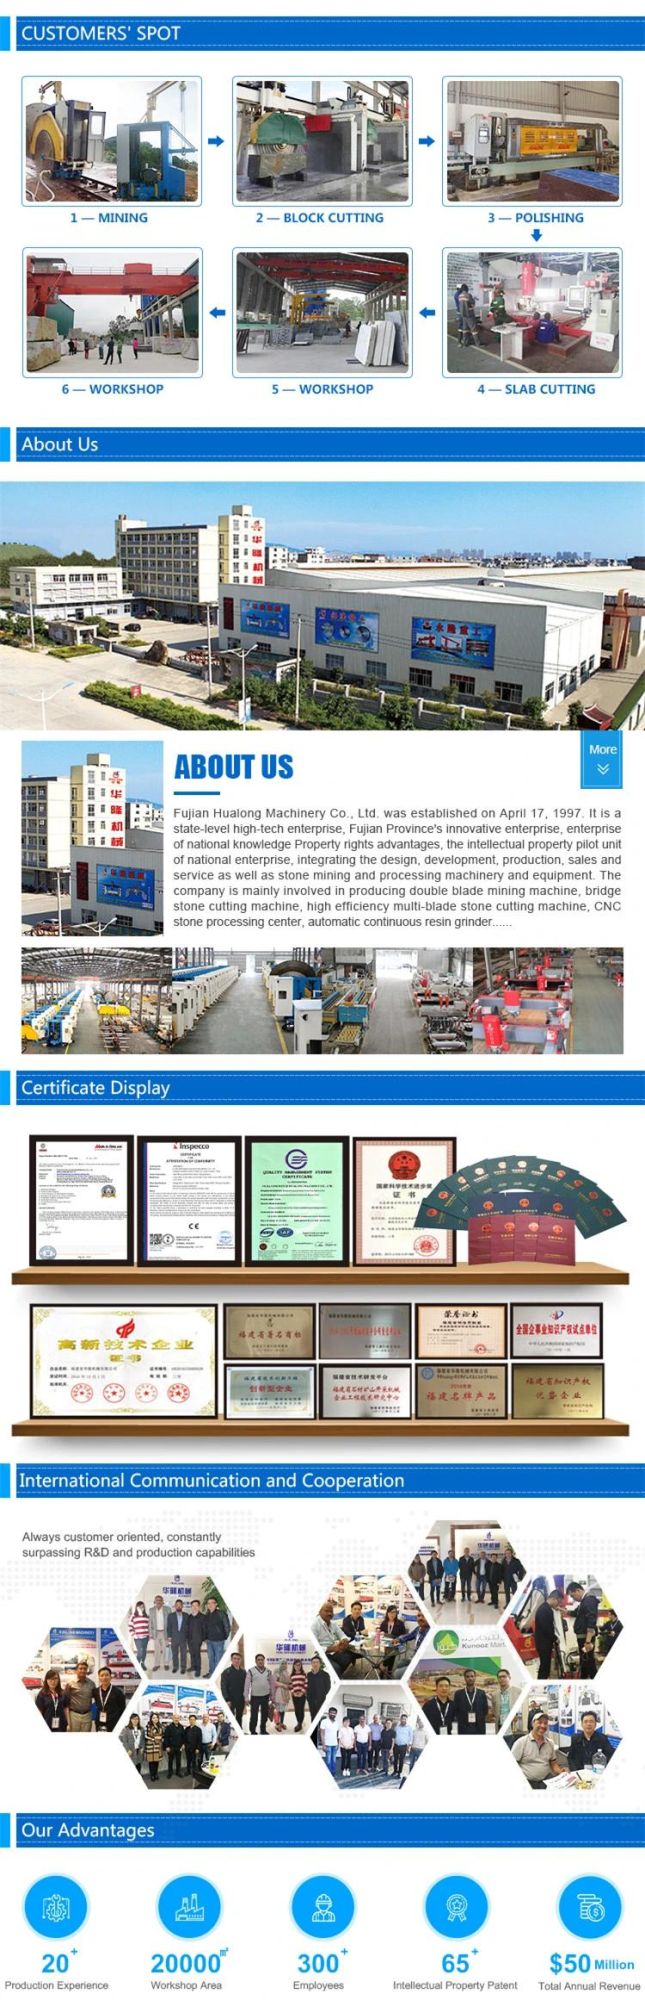 Hualong Machinery High Efficiency Multi-Blade Stone Block Cutting Machine with PLC Control System